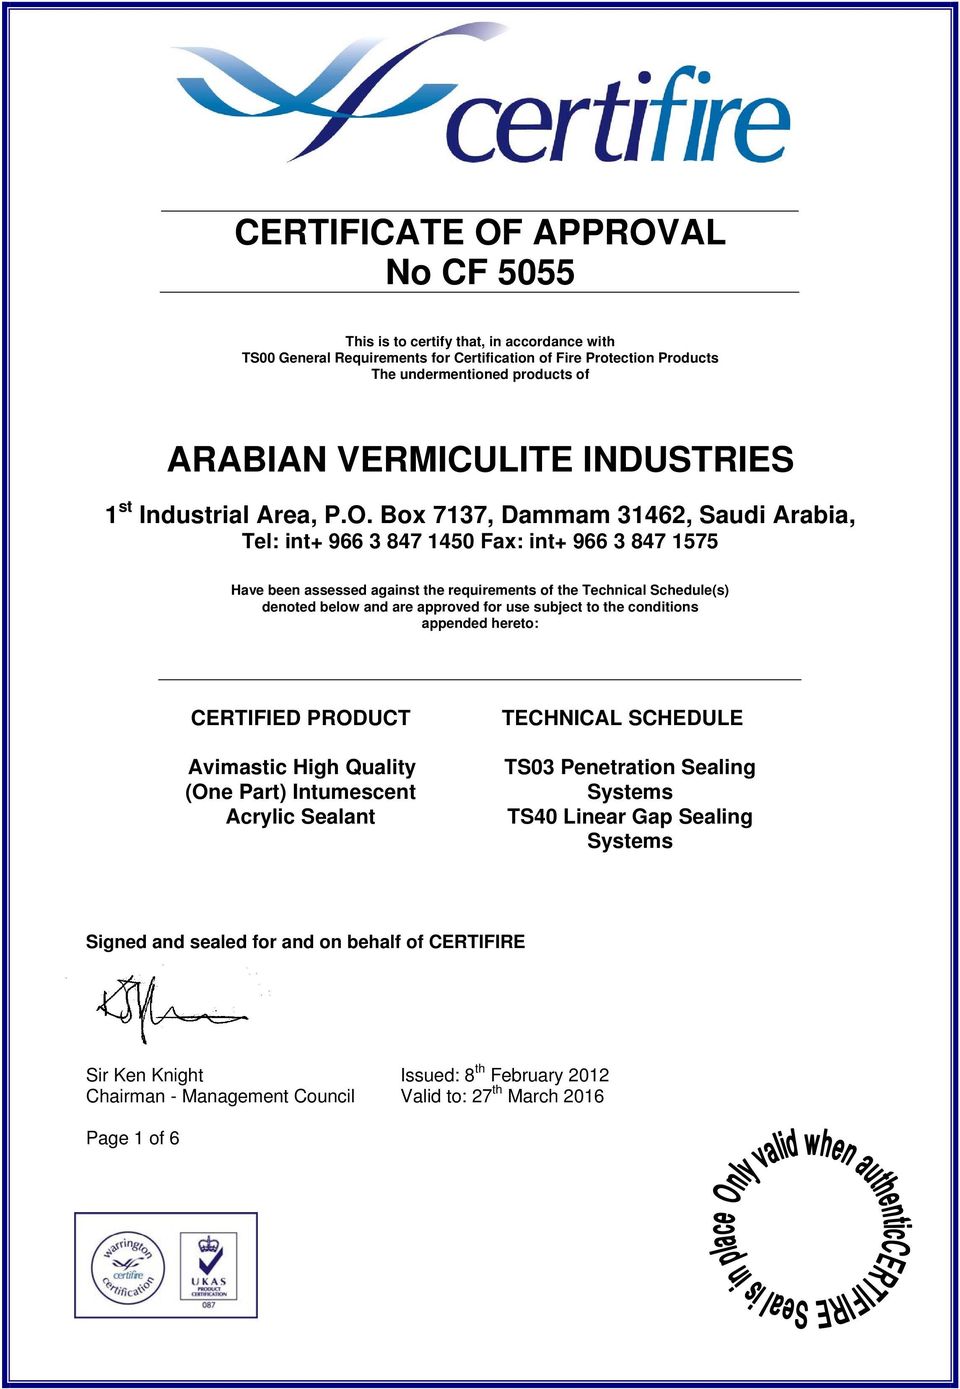 Box 7137, Dammam 31462, Saudi Arabia, Tel: int+ 966 3 847 1450 Fax: int+ 966 3 847 1575 Have been assessed against the requirements of the Technical Schedule(s) denoted below and are